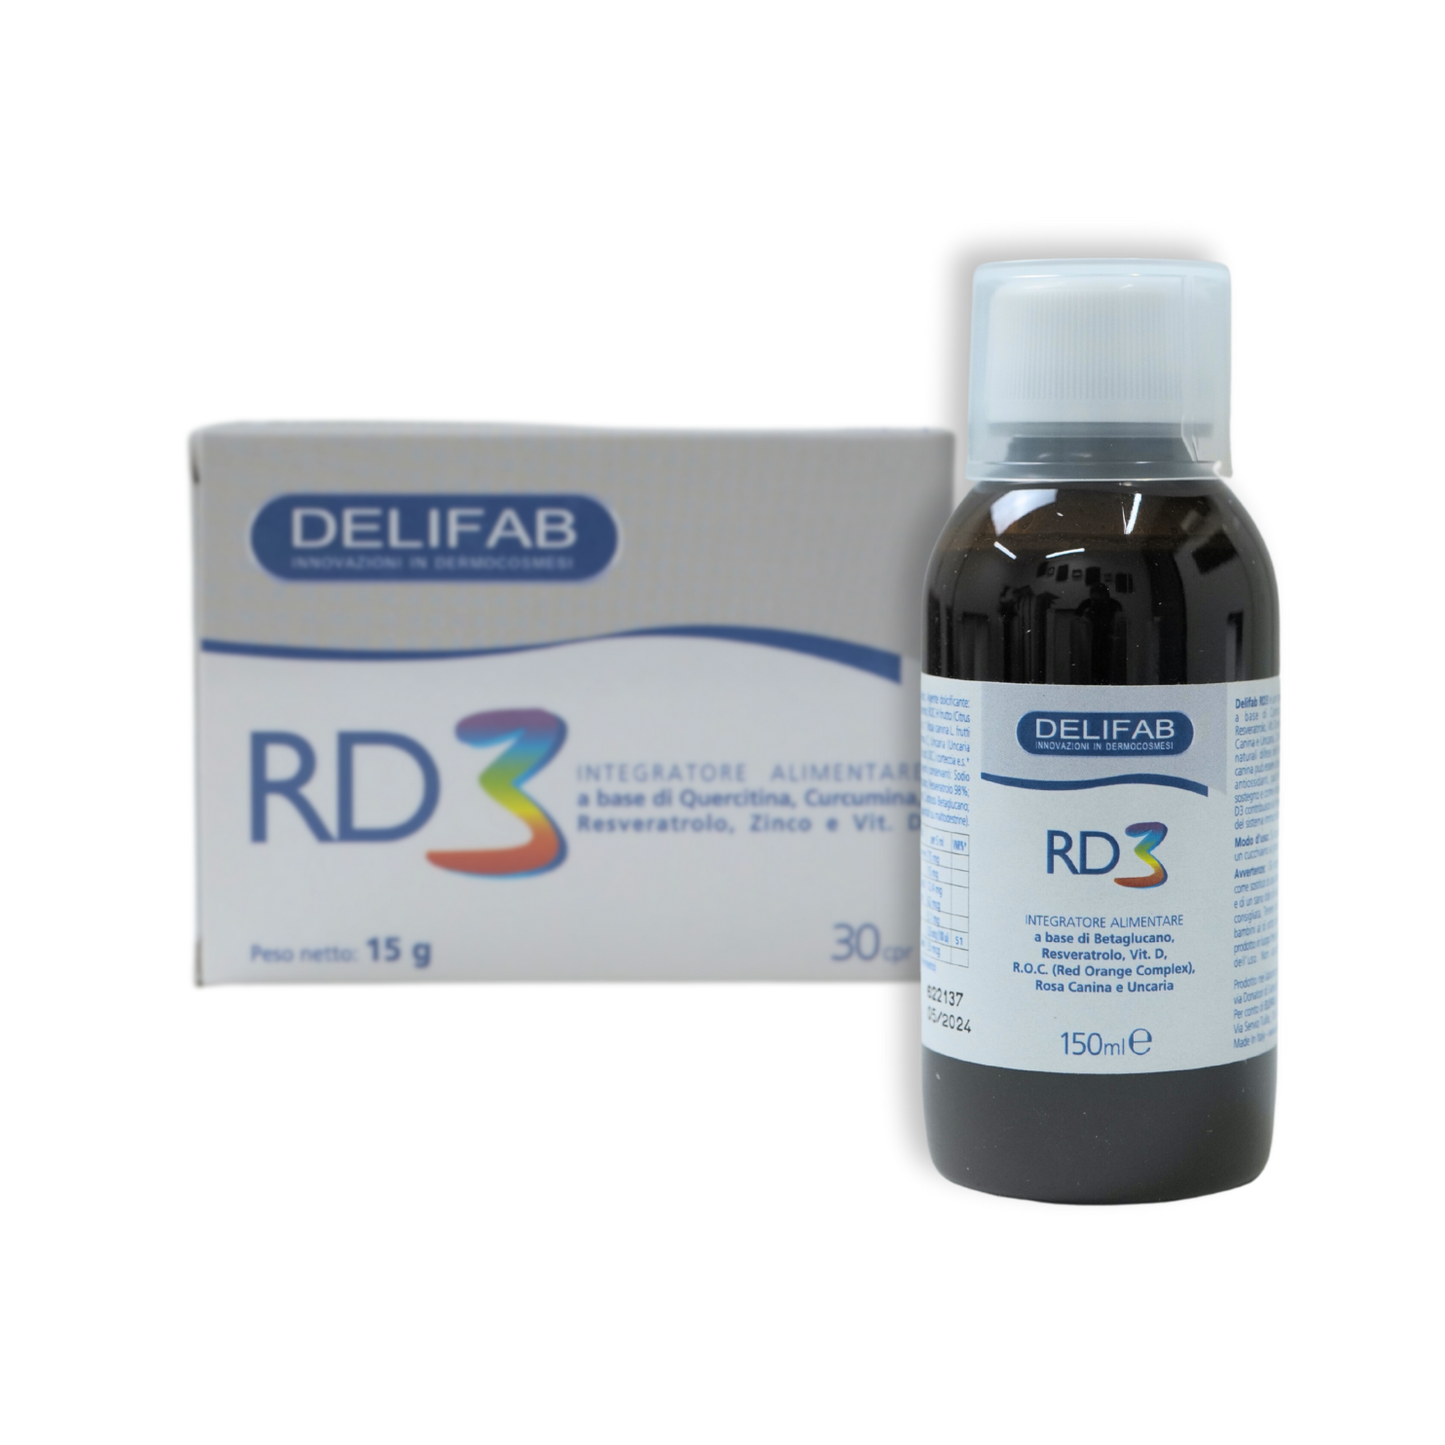 Delifab RD3 sciroppo